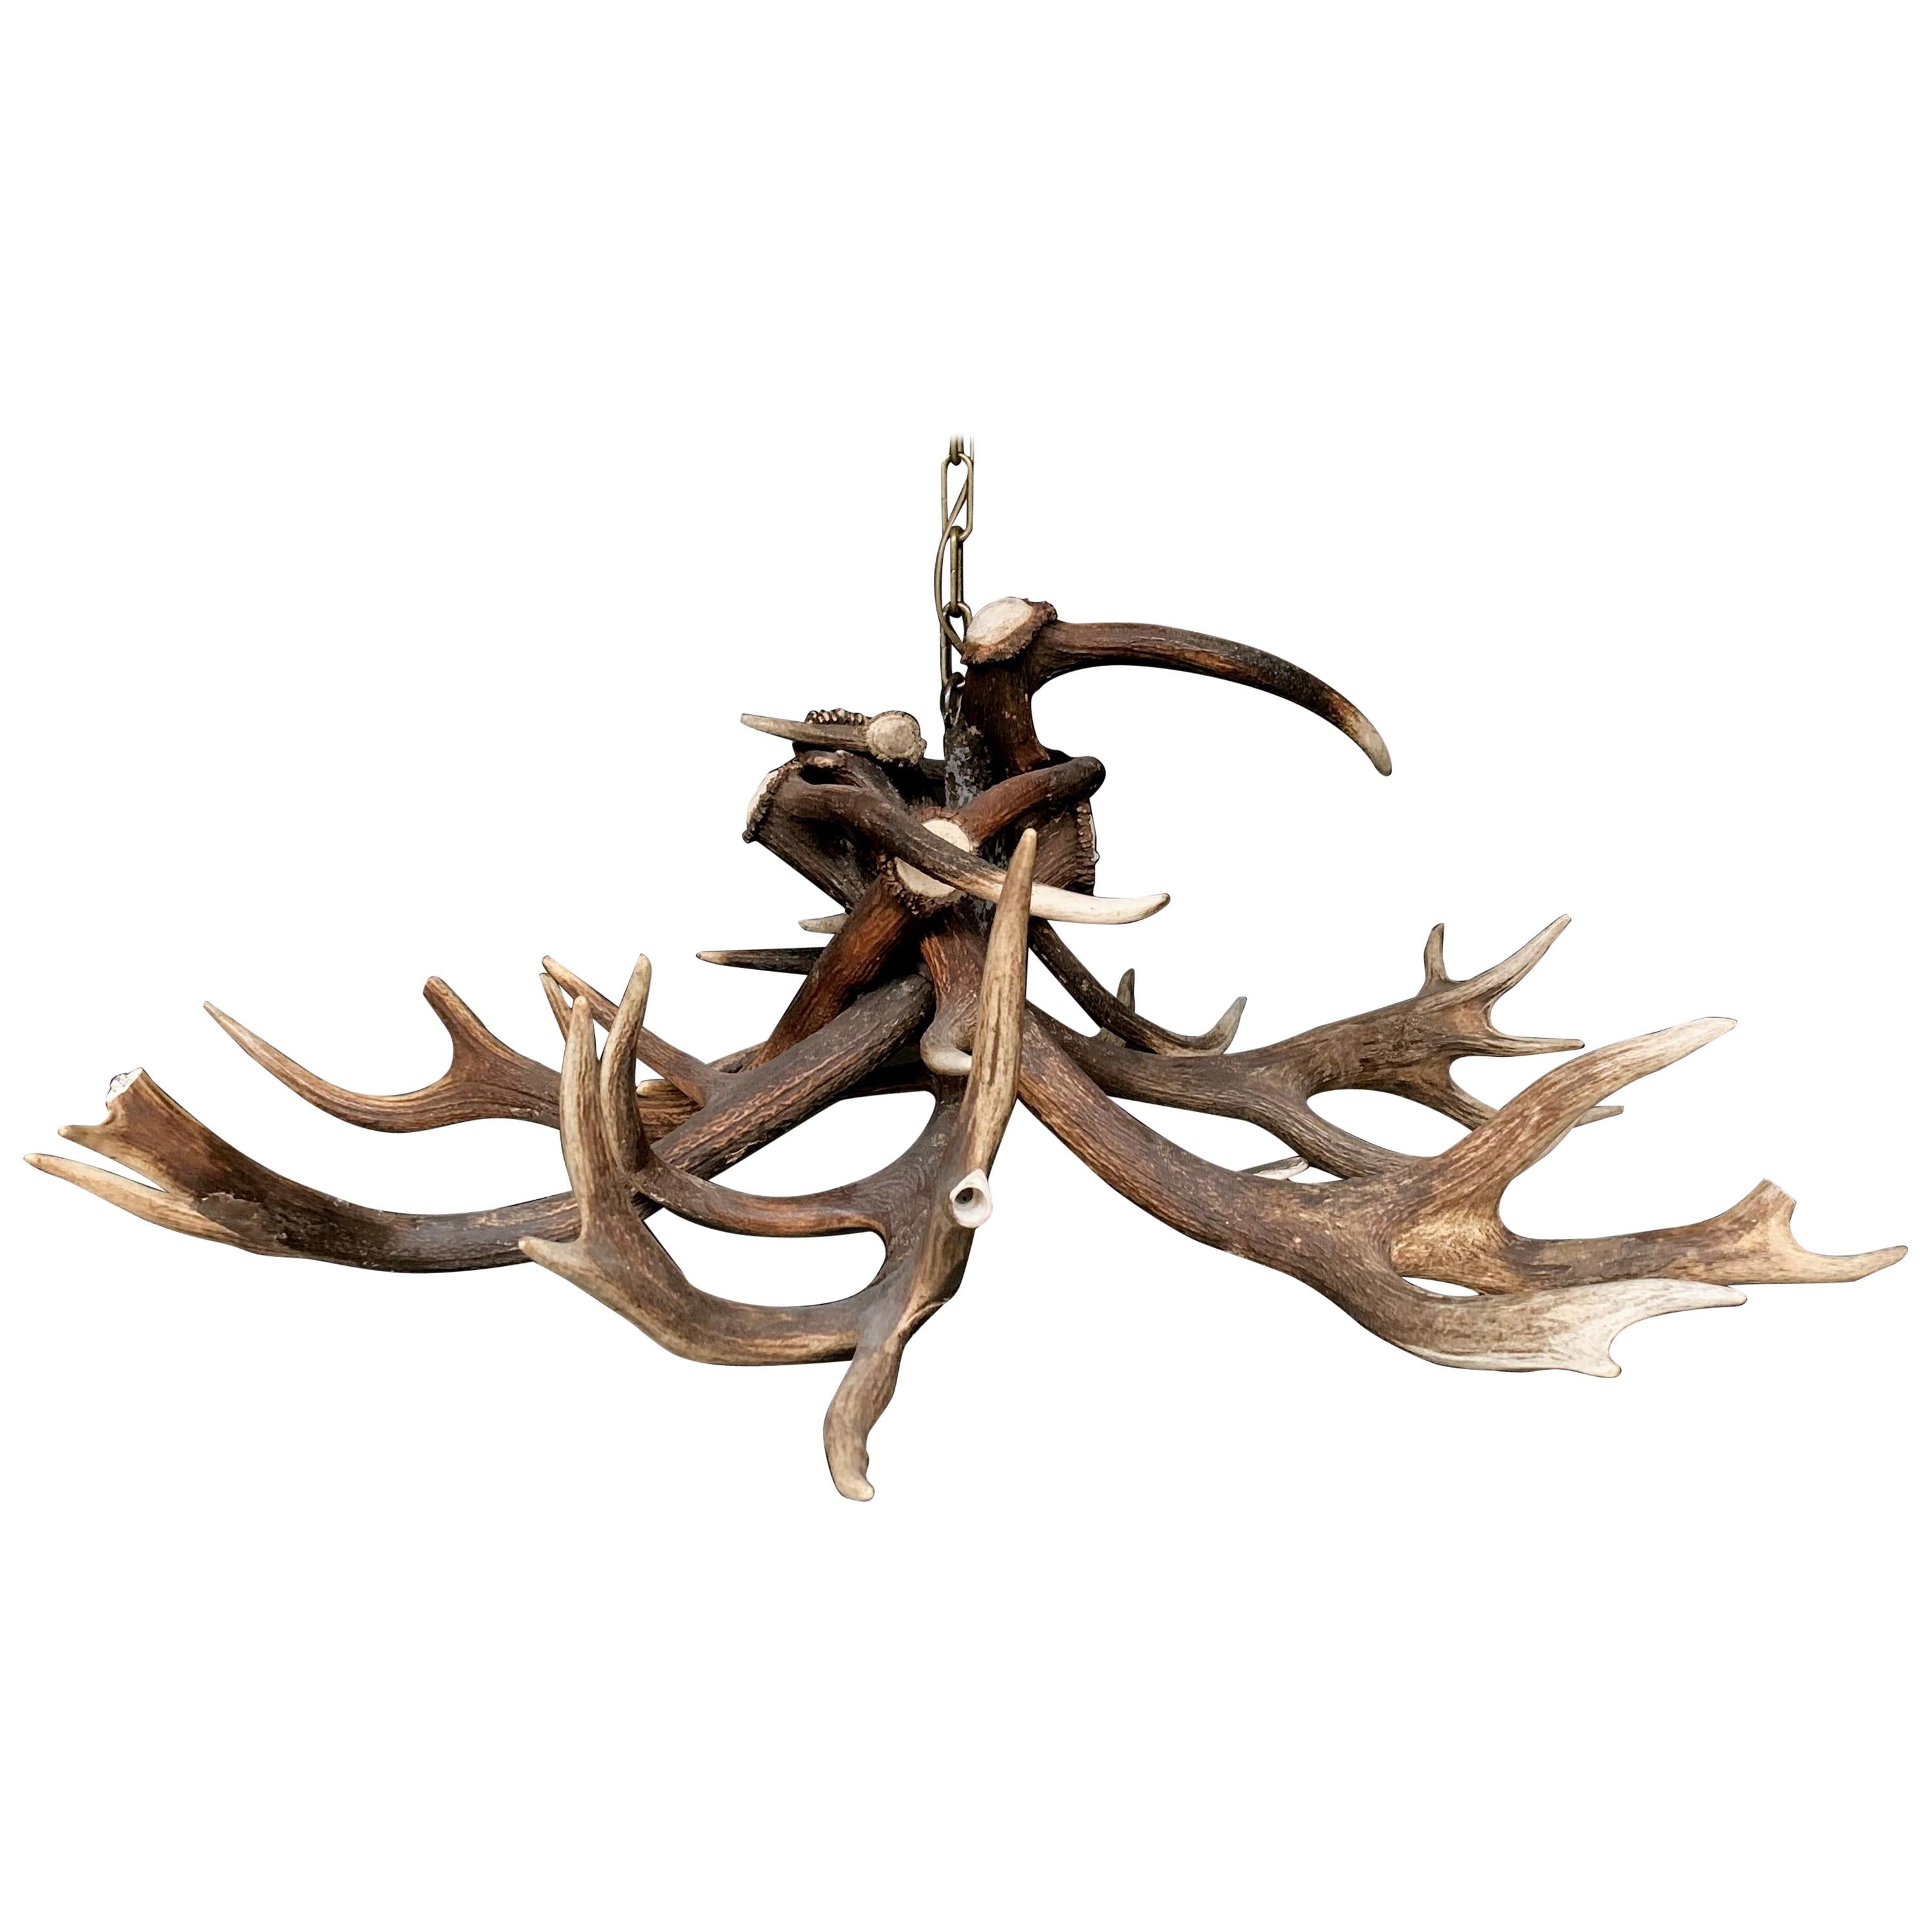 Giant Pair of Antlers of a Hungarian Red Stag For Sale at 1stDibs  red  stag antlers for sale, stag horns for sale, large deer antlers for sale